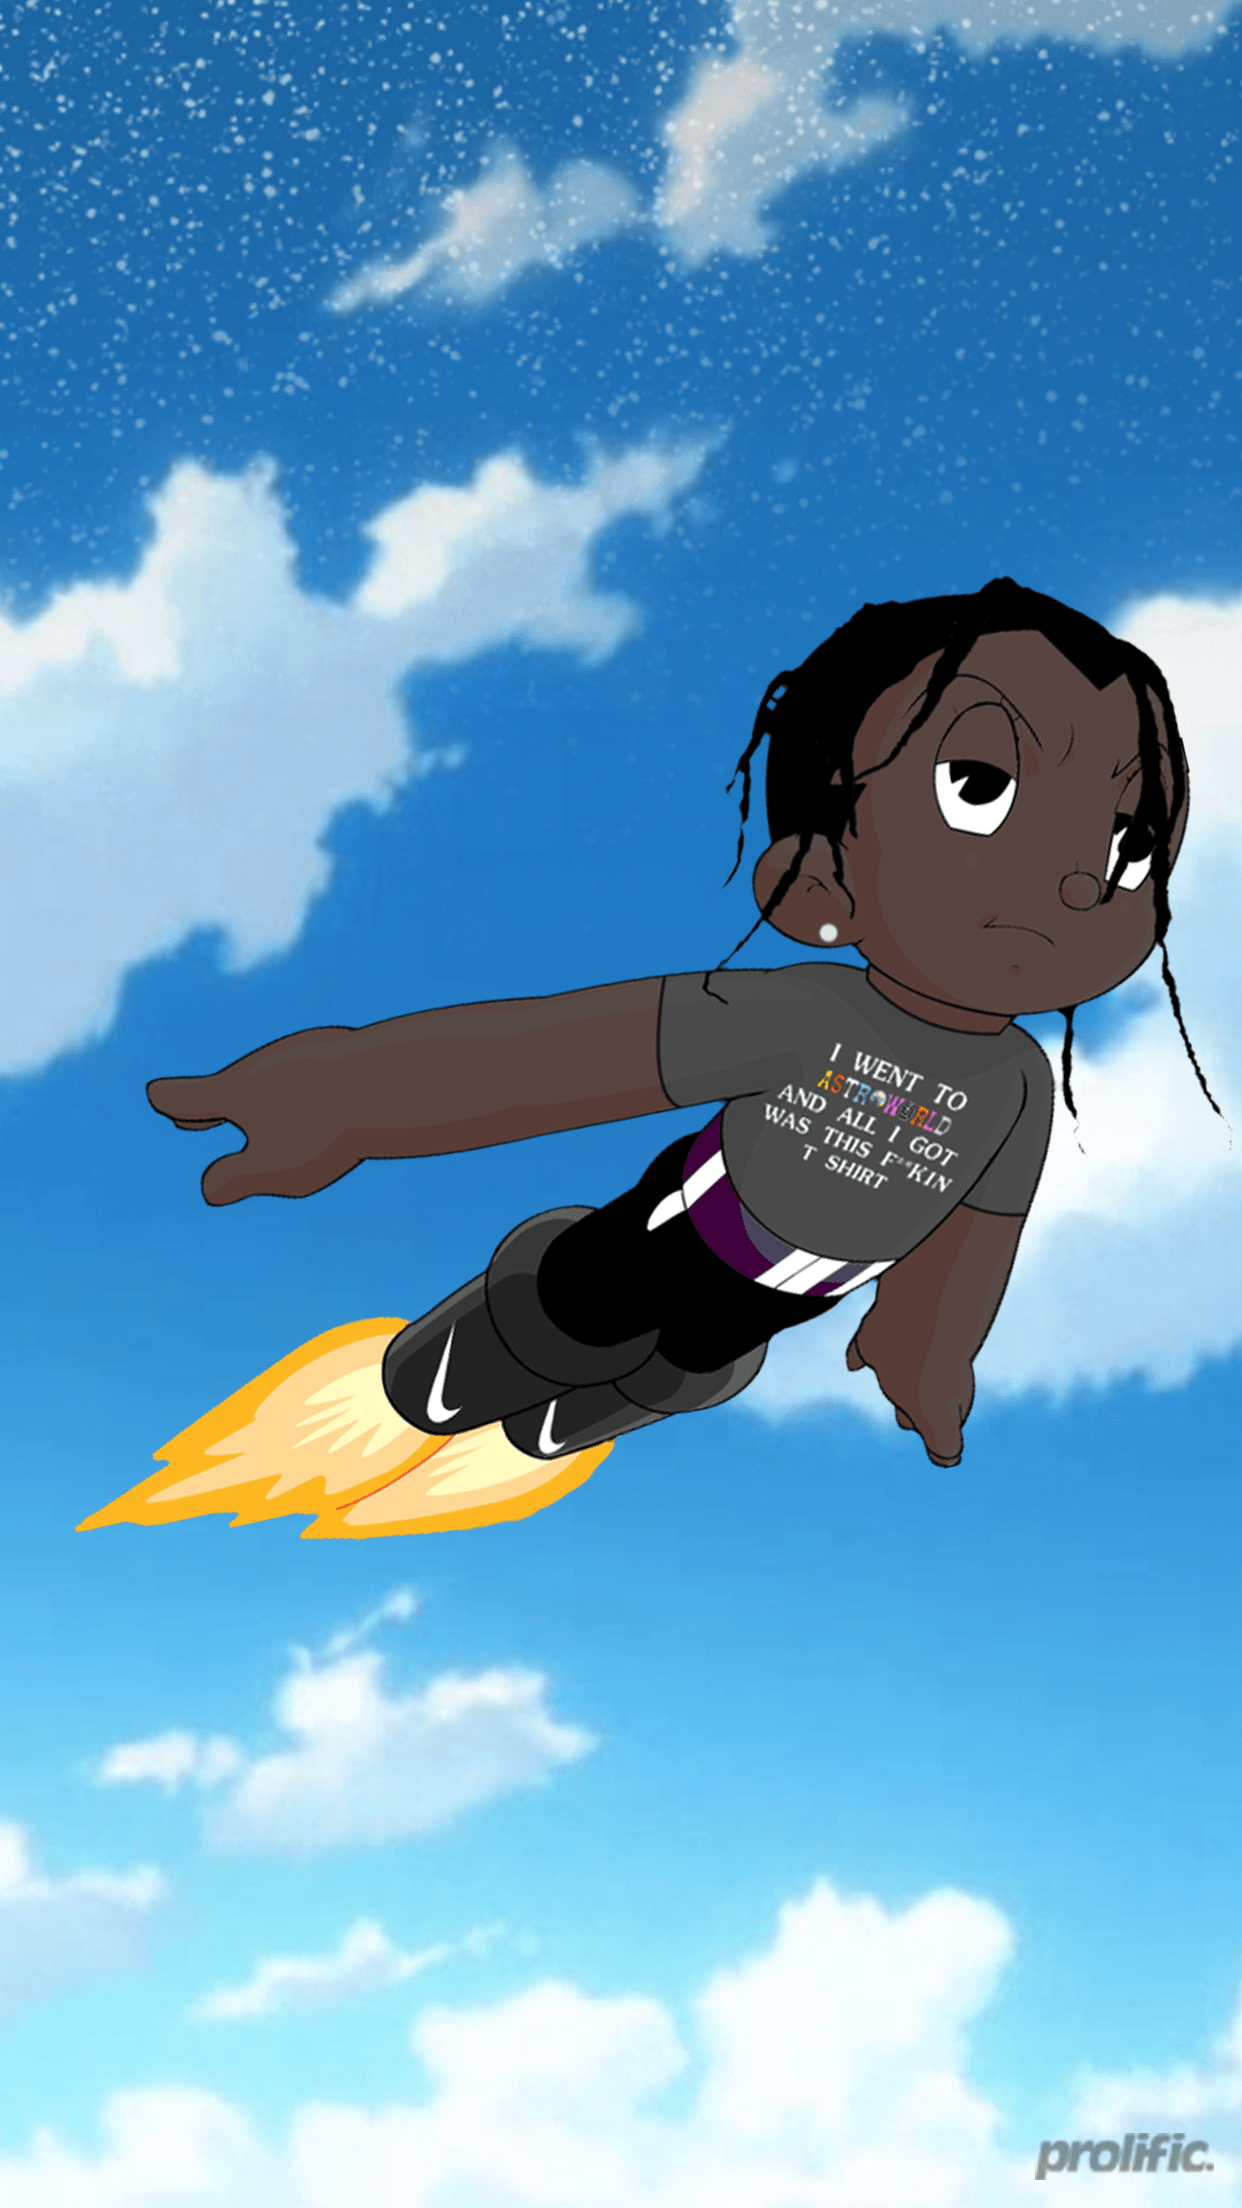 Couple people asked, so here's the Travis Scott X Astro Boy design